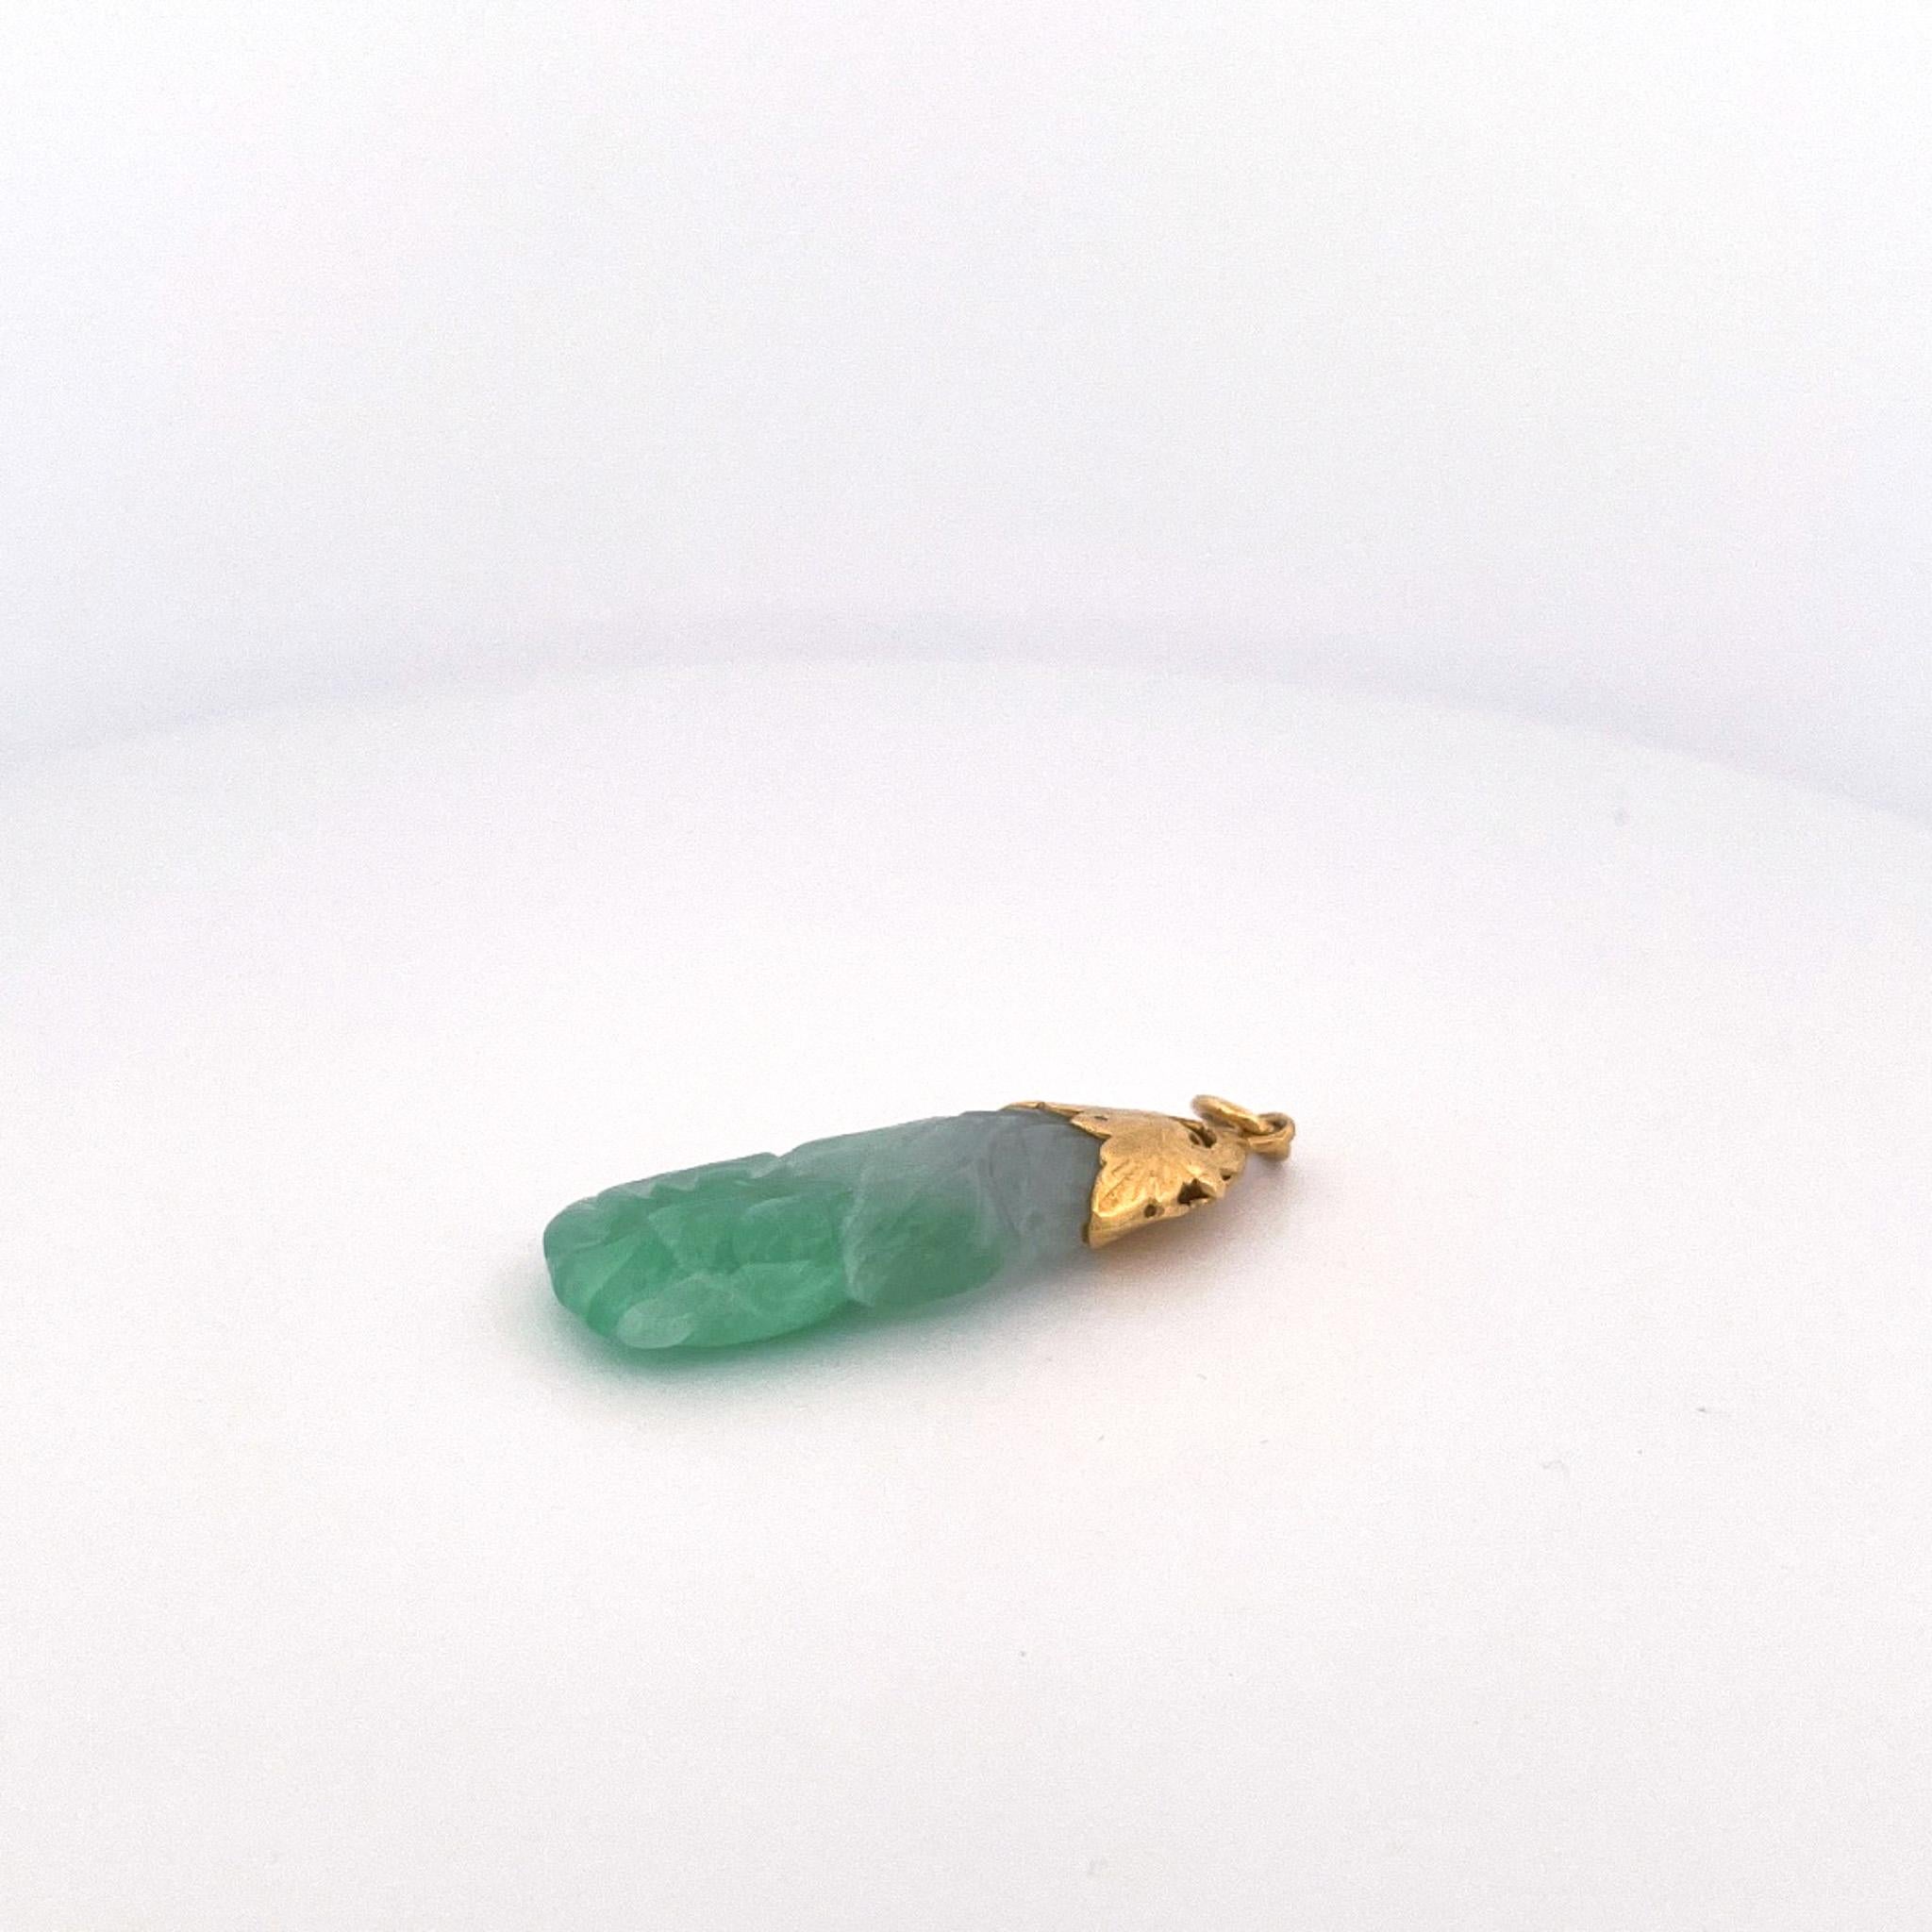 Uncut 1970s 24k Yellow Gold Carved Jadeite Pendant For Sale